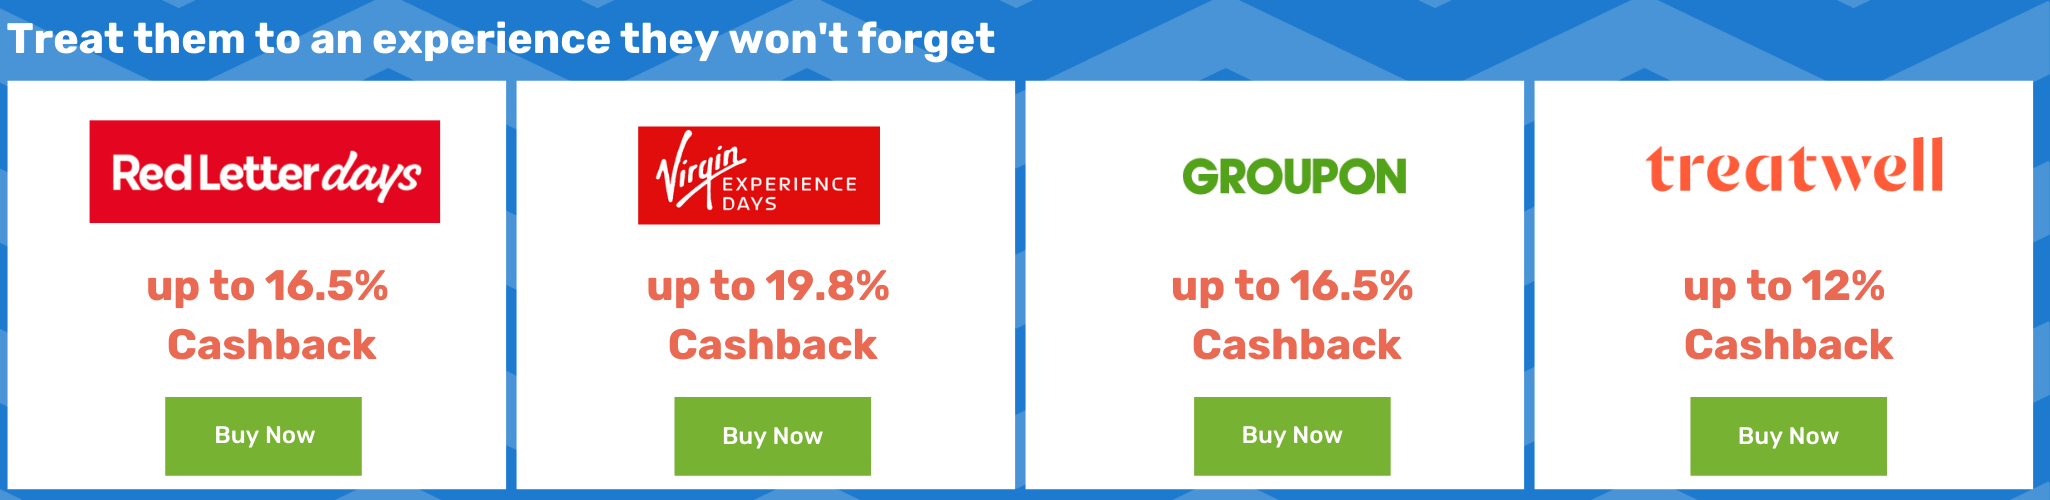 Treat your friend to an experience they won't forget - Red Letters Days up to 16.5% Cashback - Virgin experience Days up to 19.8% Cashback - Groupon up to 16.5% Cashback - treatwell up to 12% Cashback